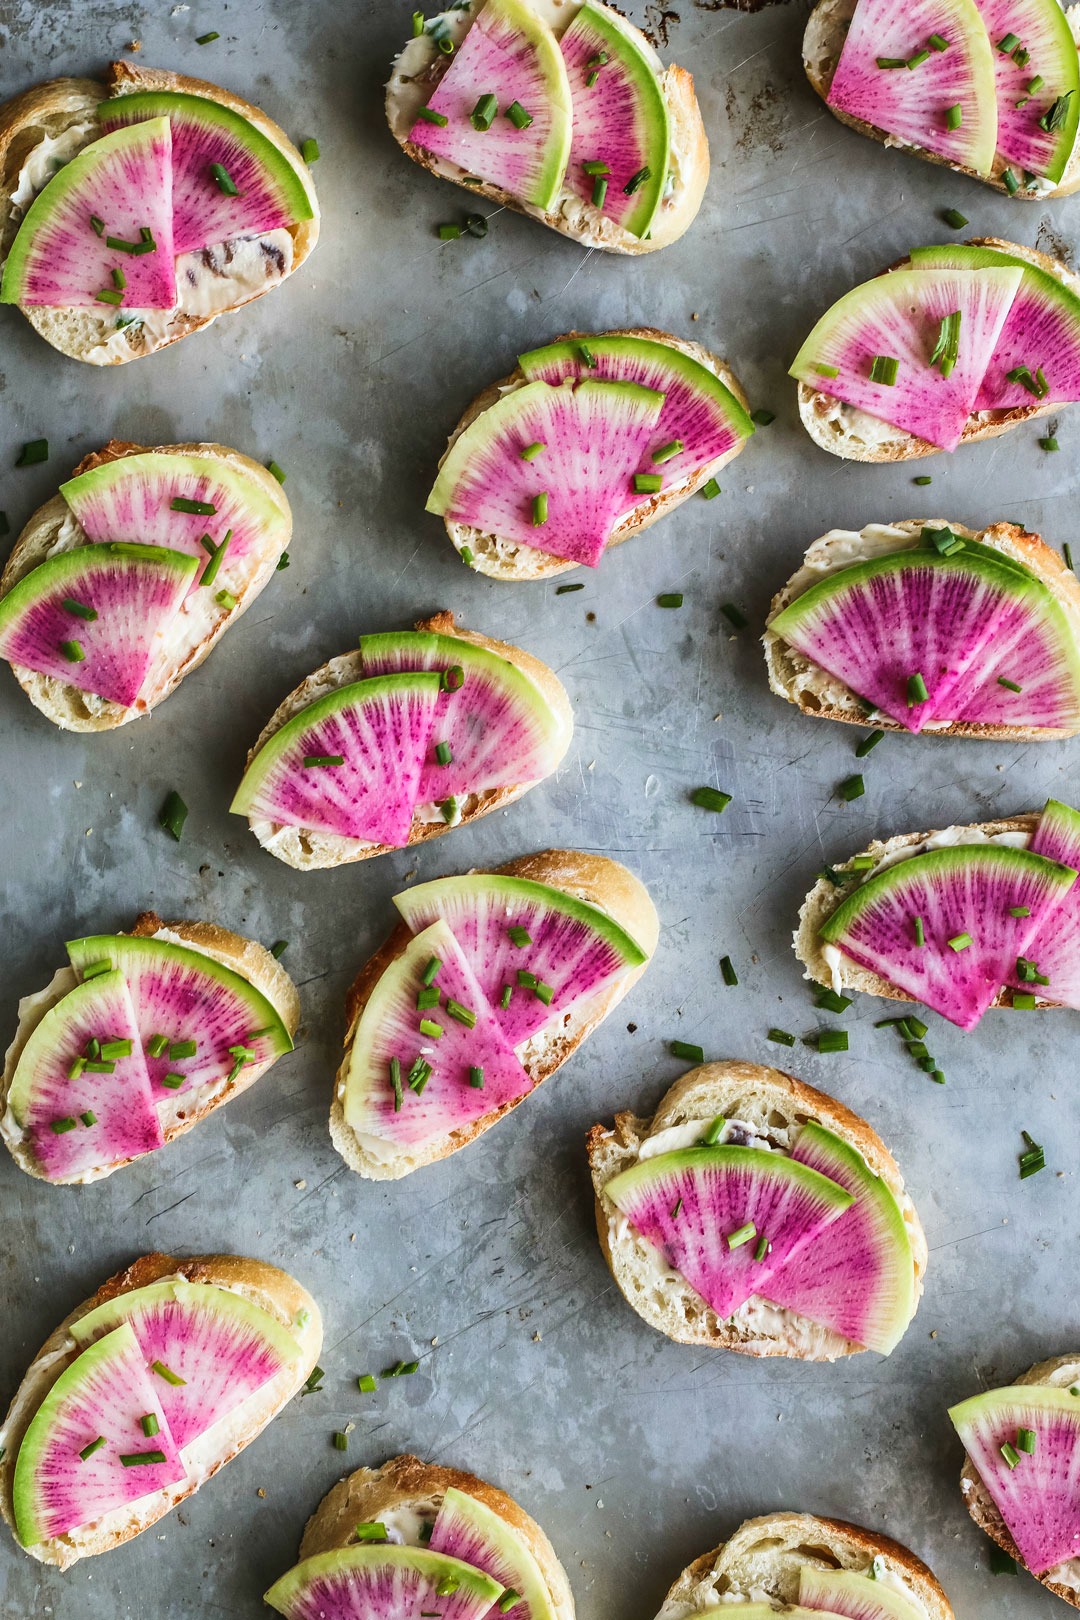 Watermelon Radishes With Anchovy Butter on Sliced Baguette | Killing Thyme